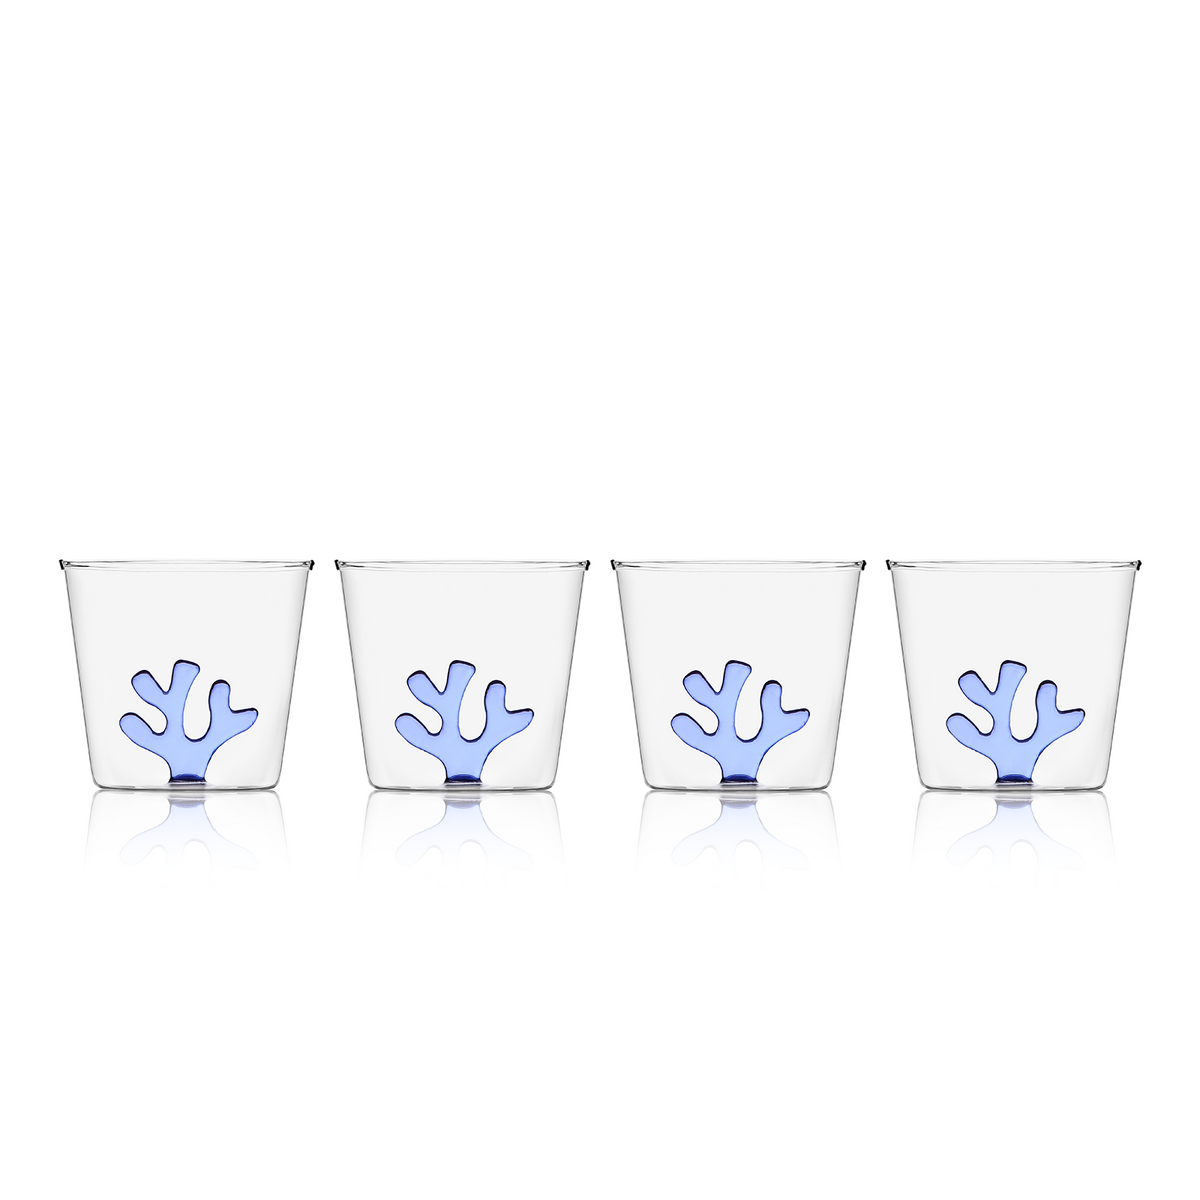 Sprezz Whimsical Tumbler Glasses Cobalt Blue | Colored Glassware Set of Four. Sprezz tumbler glass made from durable, non-toxic borosilicate glass. crystal colored glasses designed in Italy by Alessandra Baldereschi